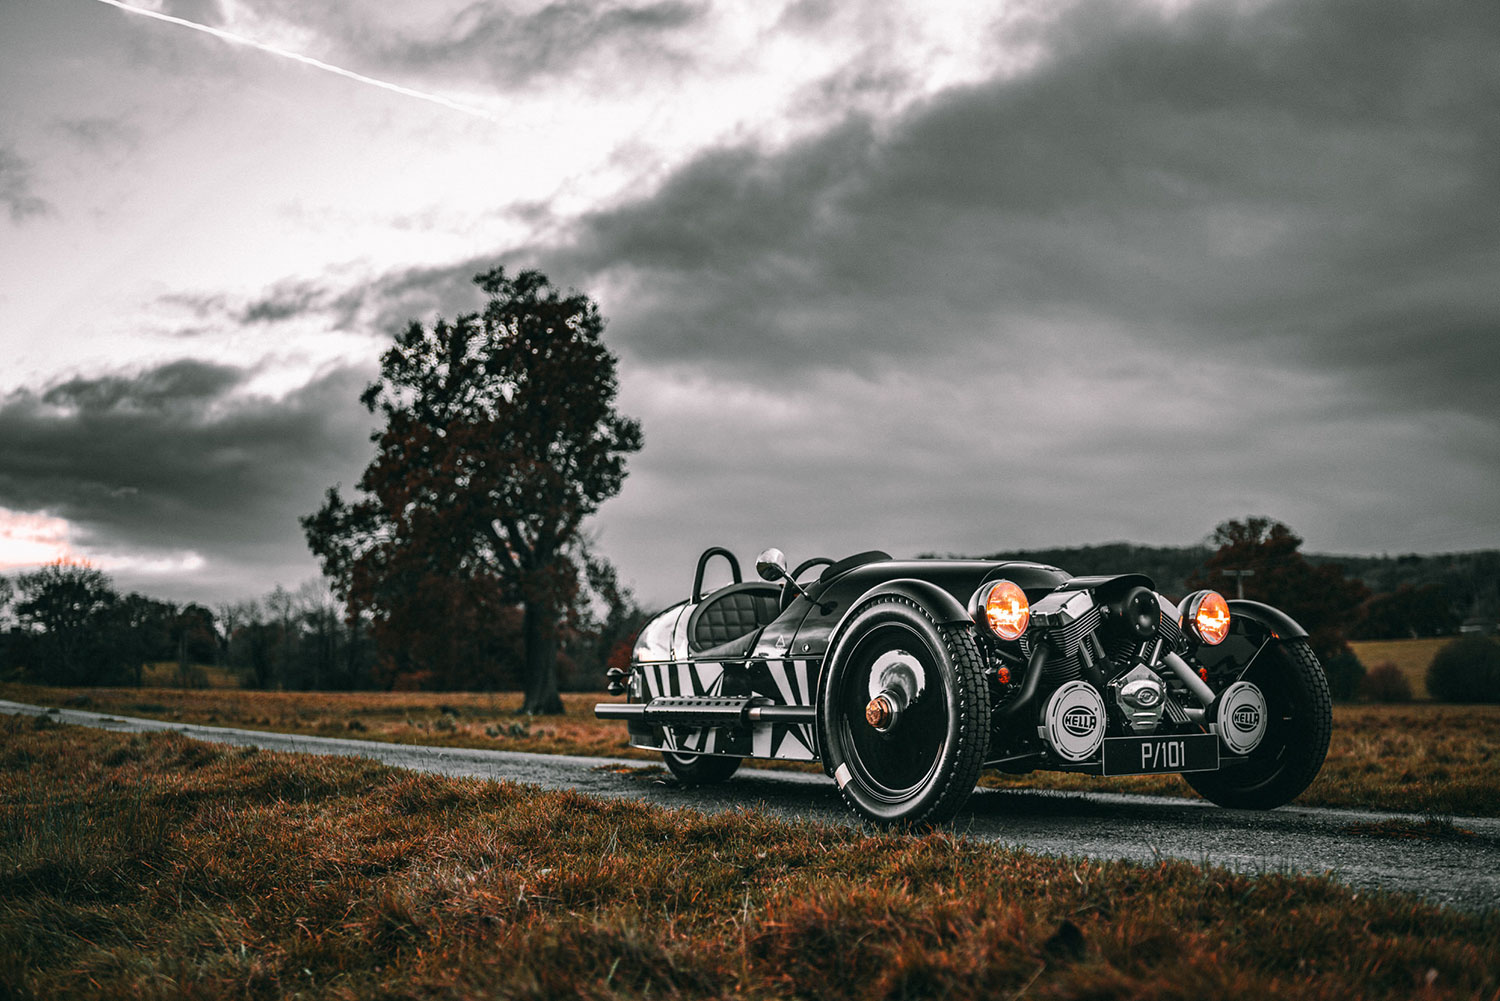 Morgan presents new limited-edition 3 Wheeler P101 as run-out model.